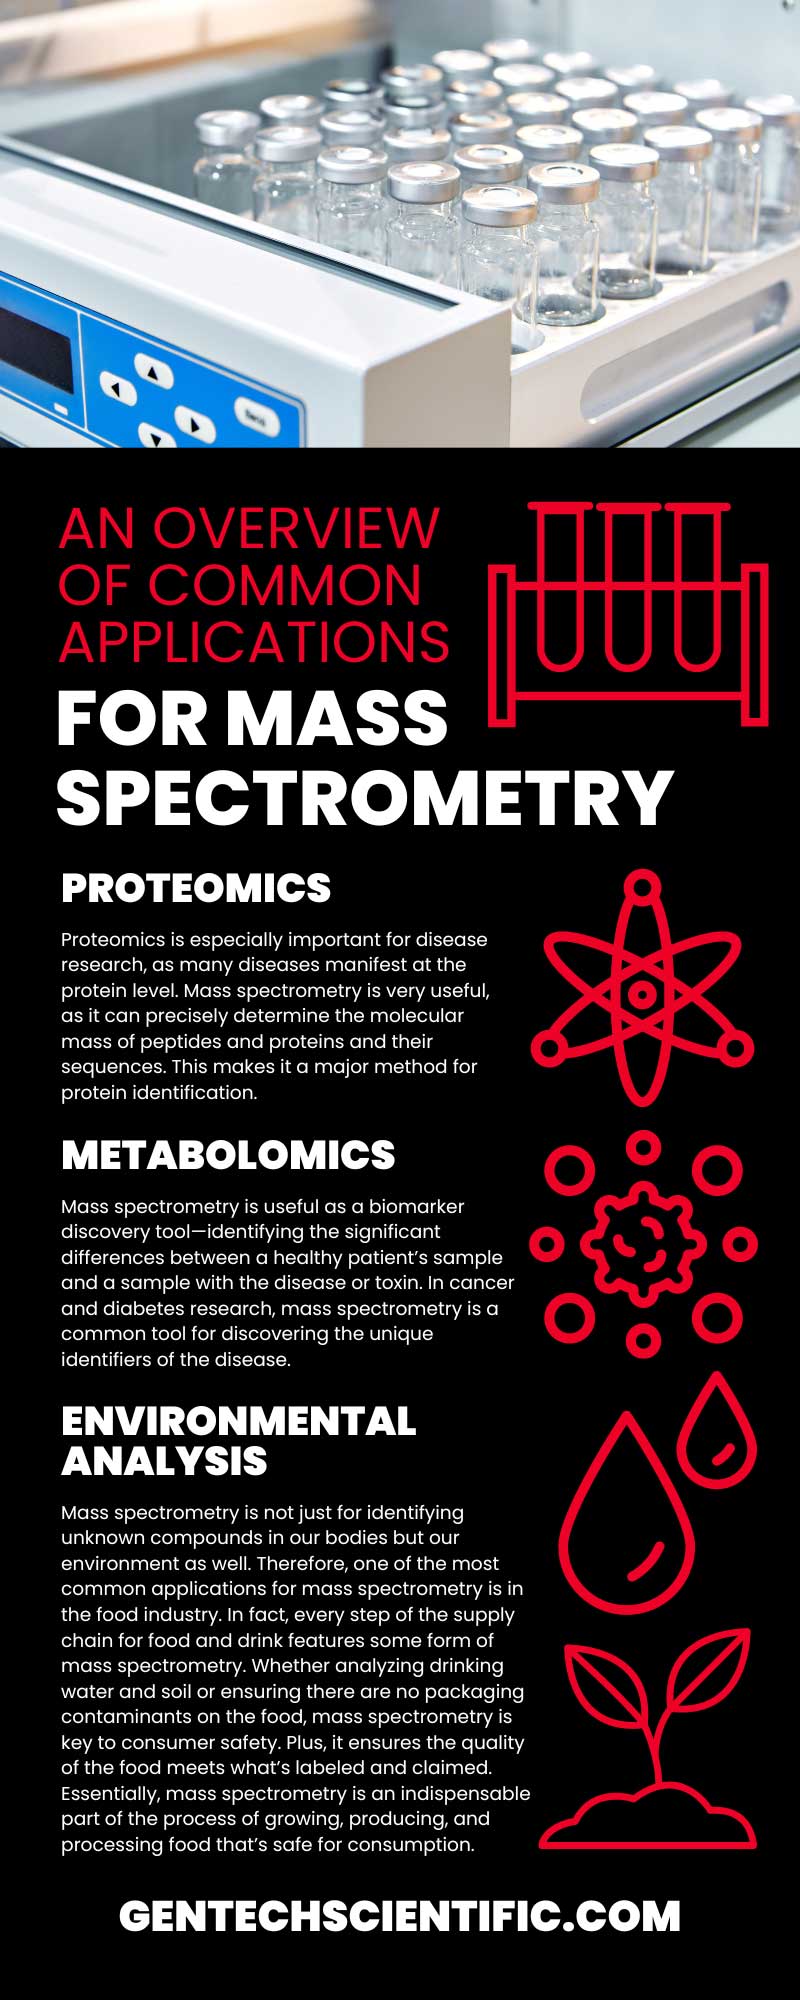 An Overview of Common Applications for Mass Spectrometry